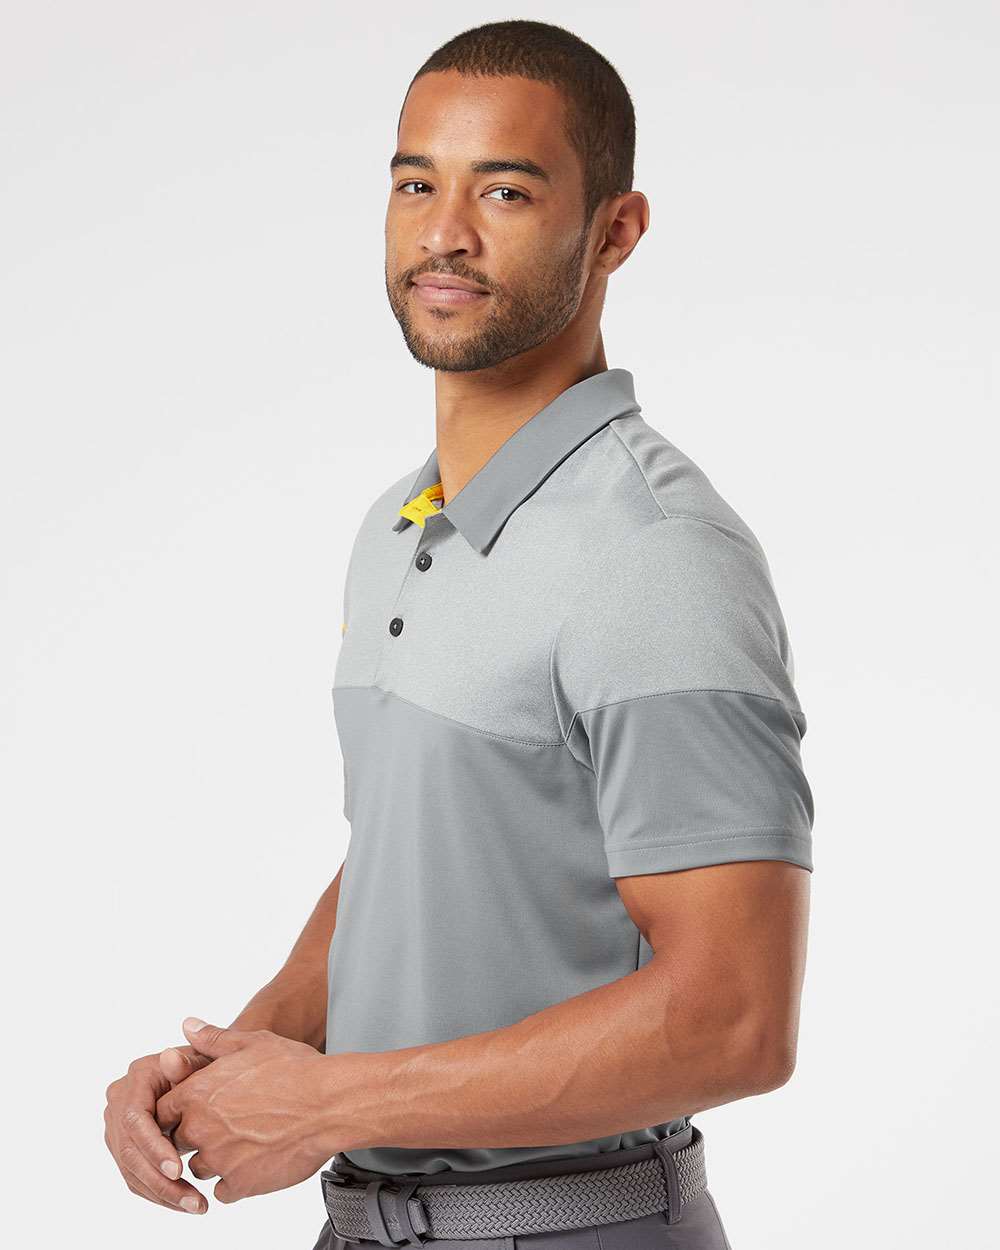 Heathered 3-Stripes Colorblocked Men's Polo - Adidas A213